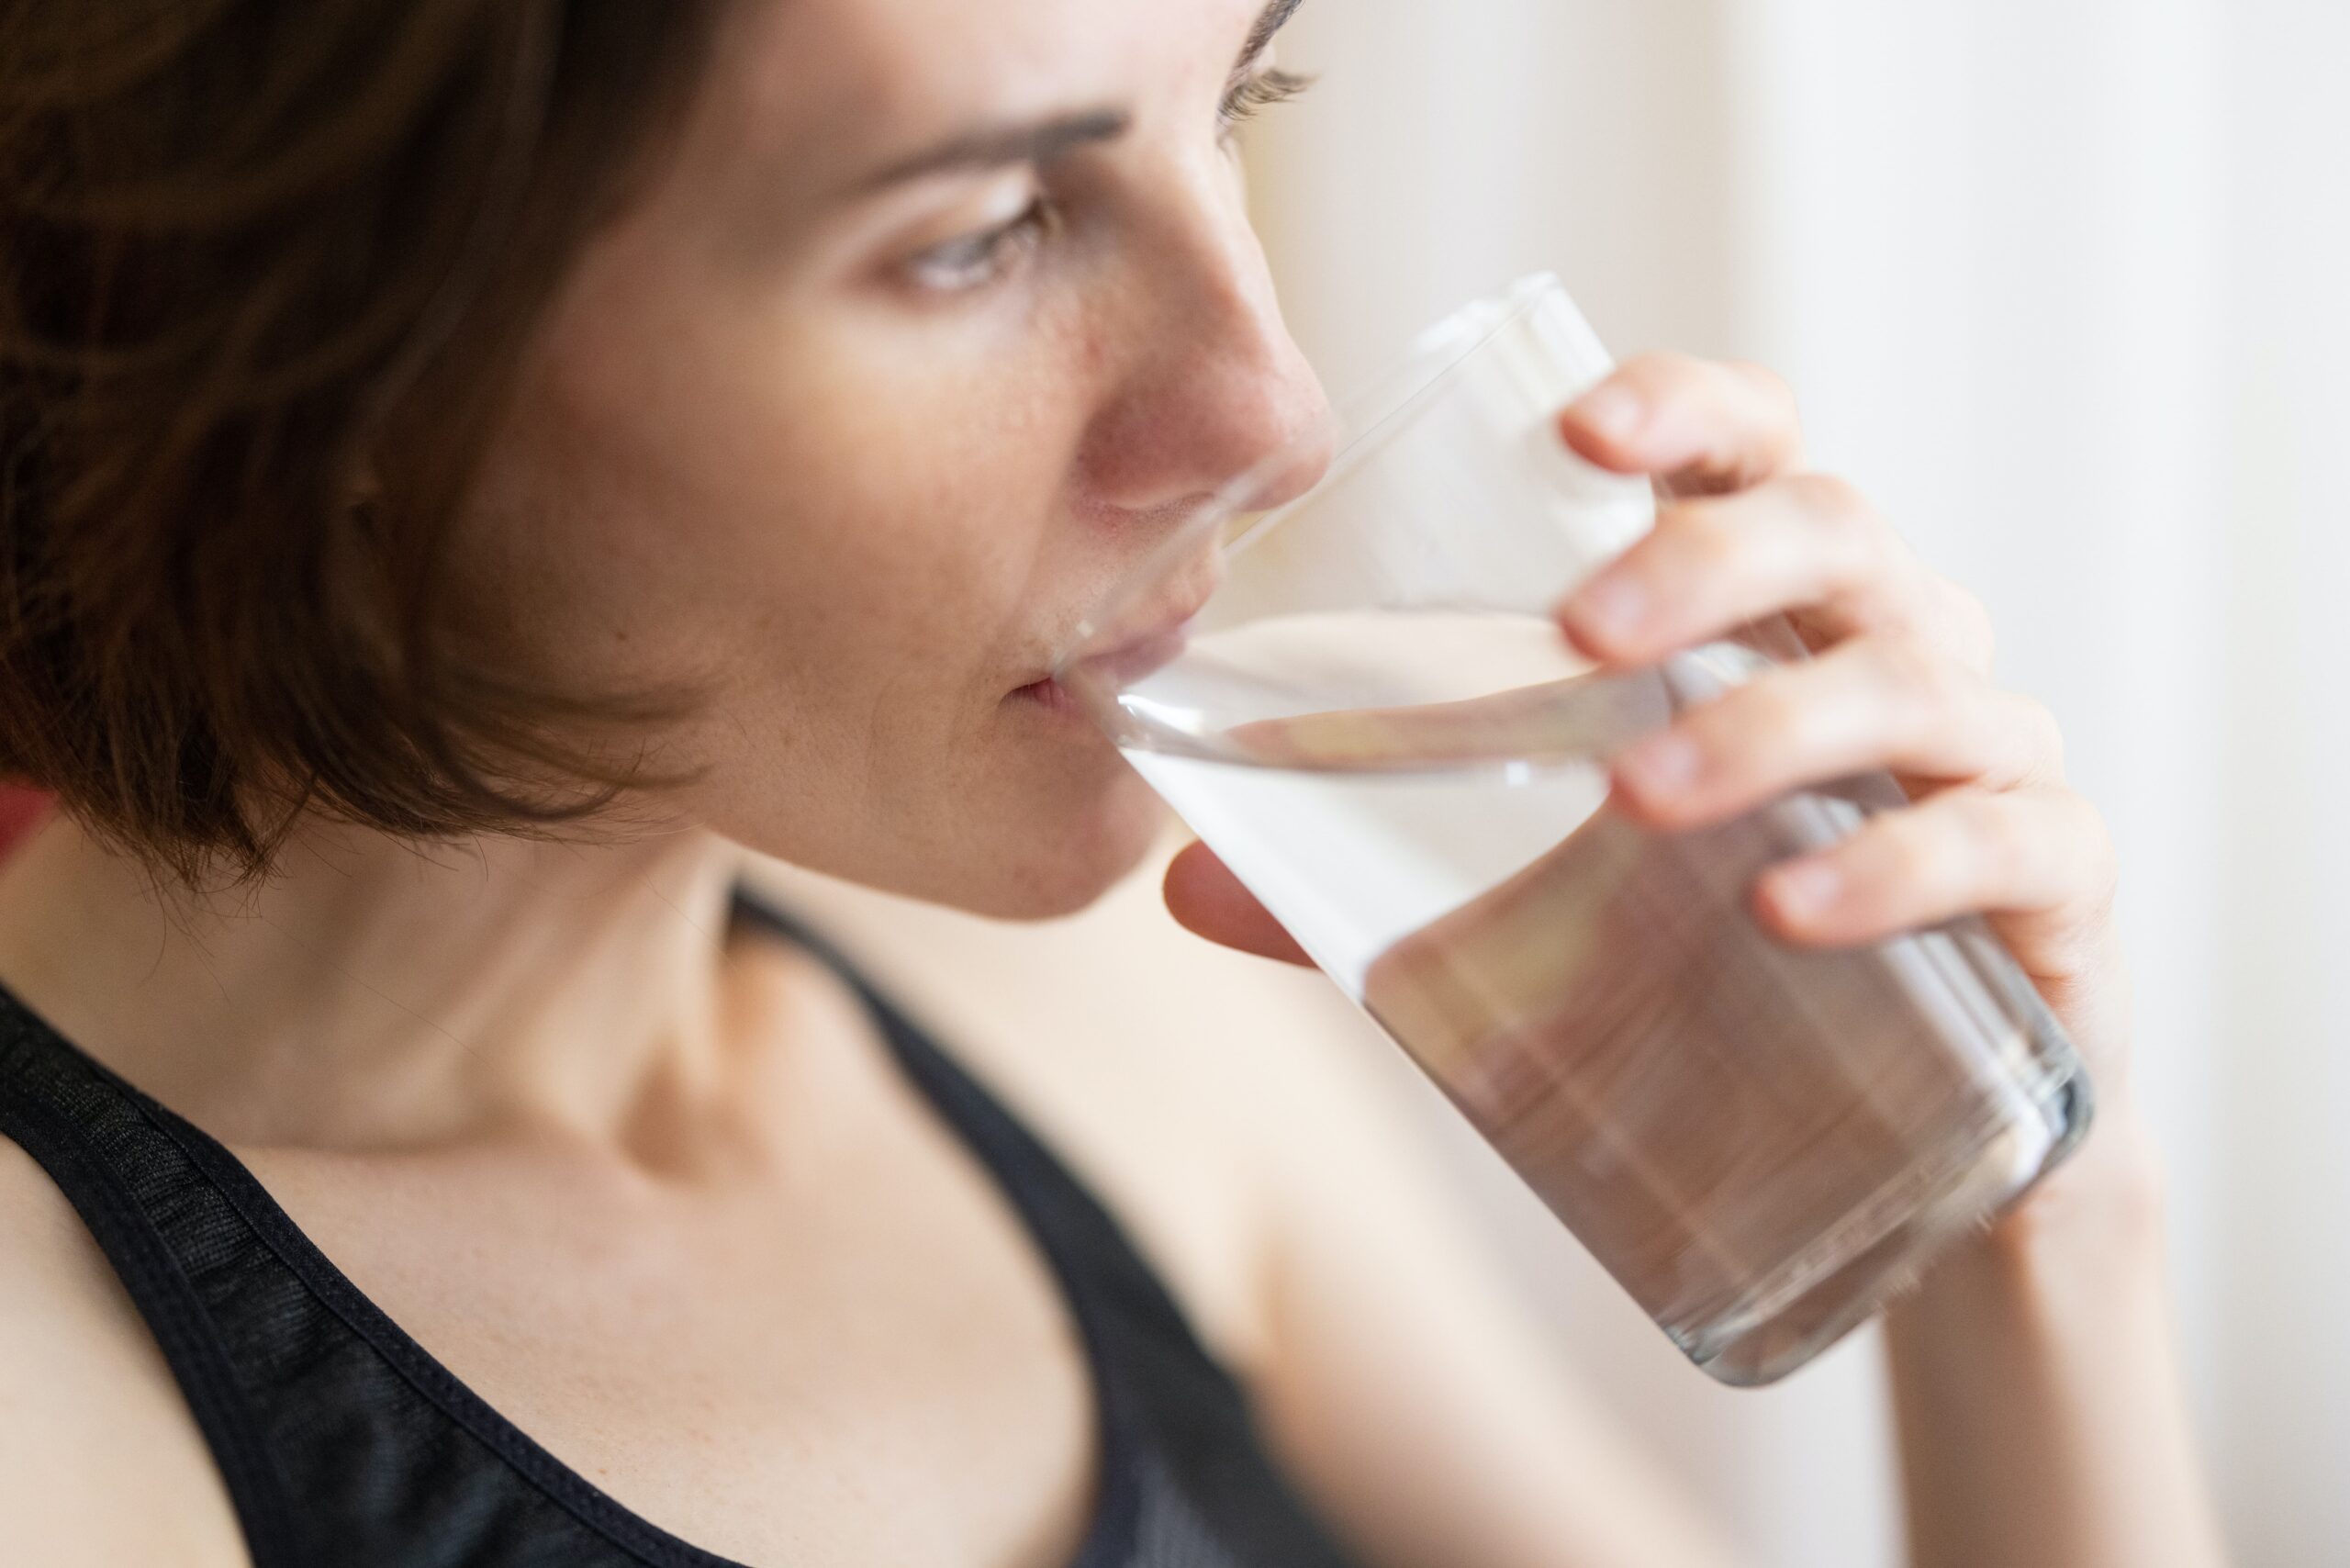 Anti-aging tip about the importance of drinking water. A photo of a woman hydrating by drinking a glass of water.